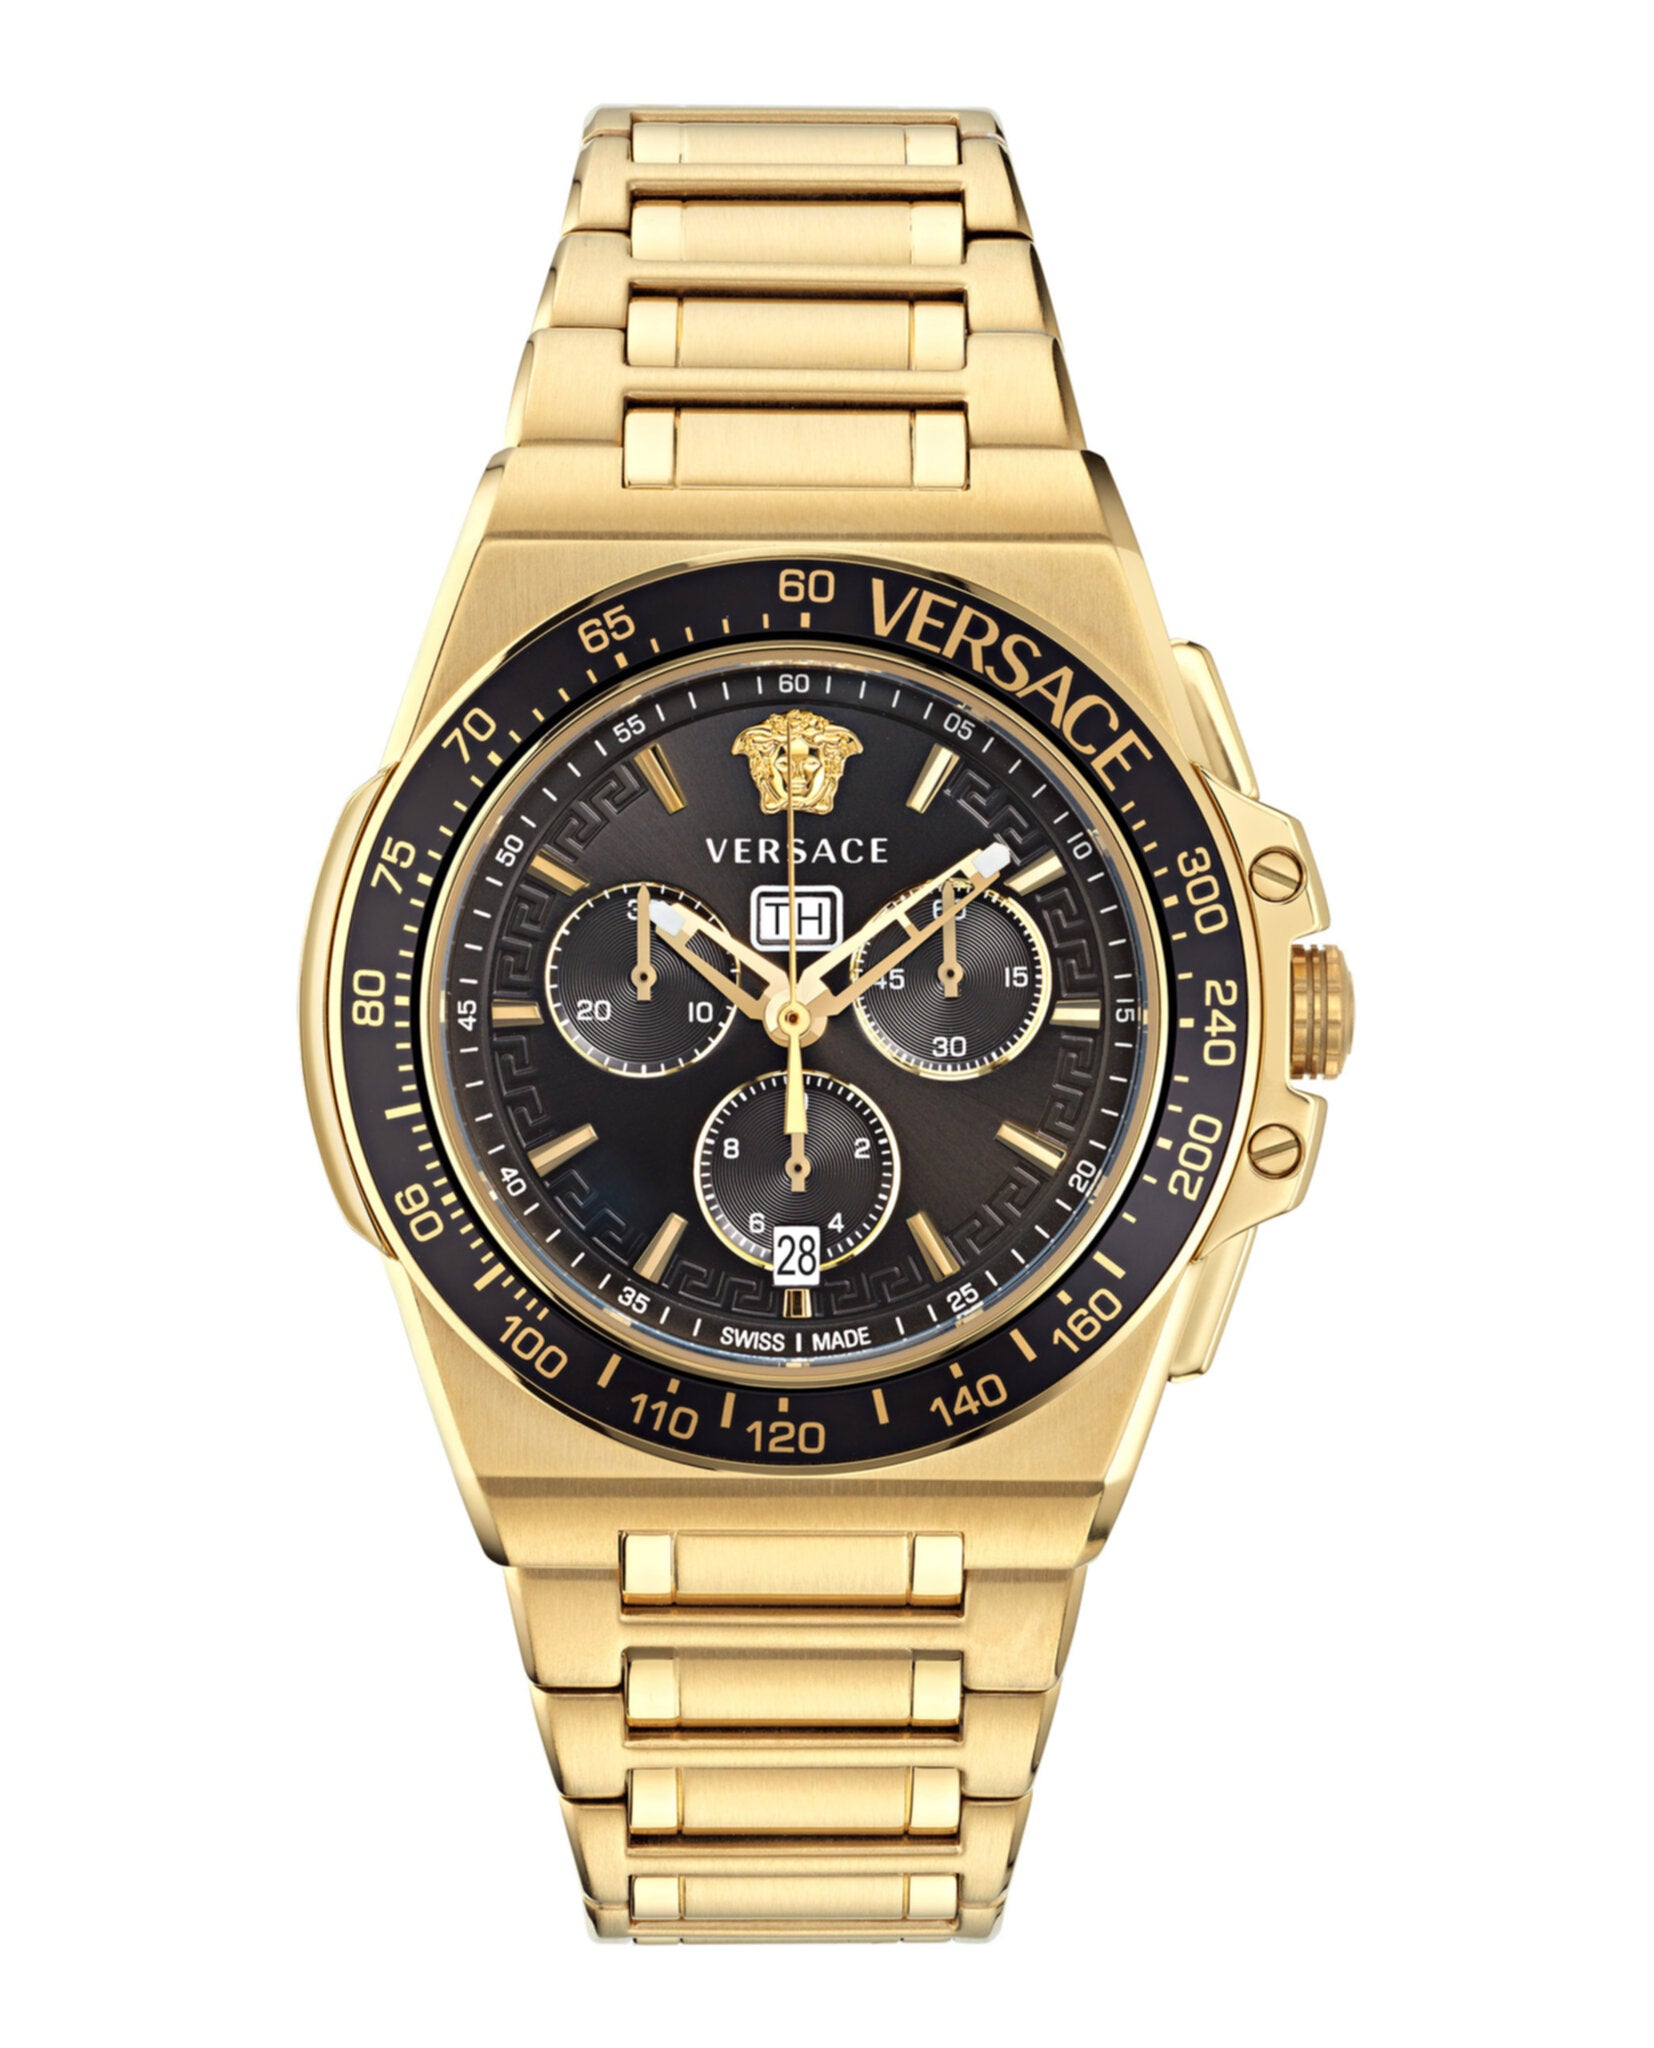 Versace Mens Greca Extreme Chrono Watches | MadaLuxe Time – Madaluxe Time | Schweizer Uhren